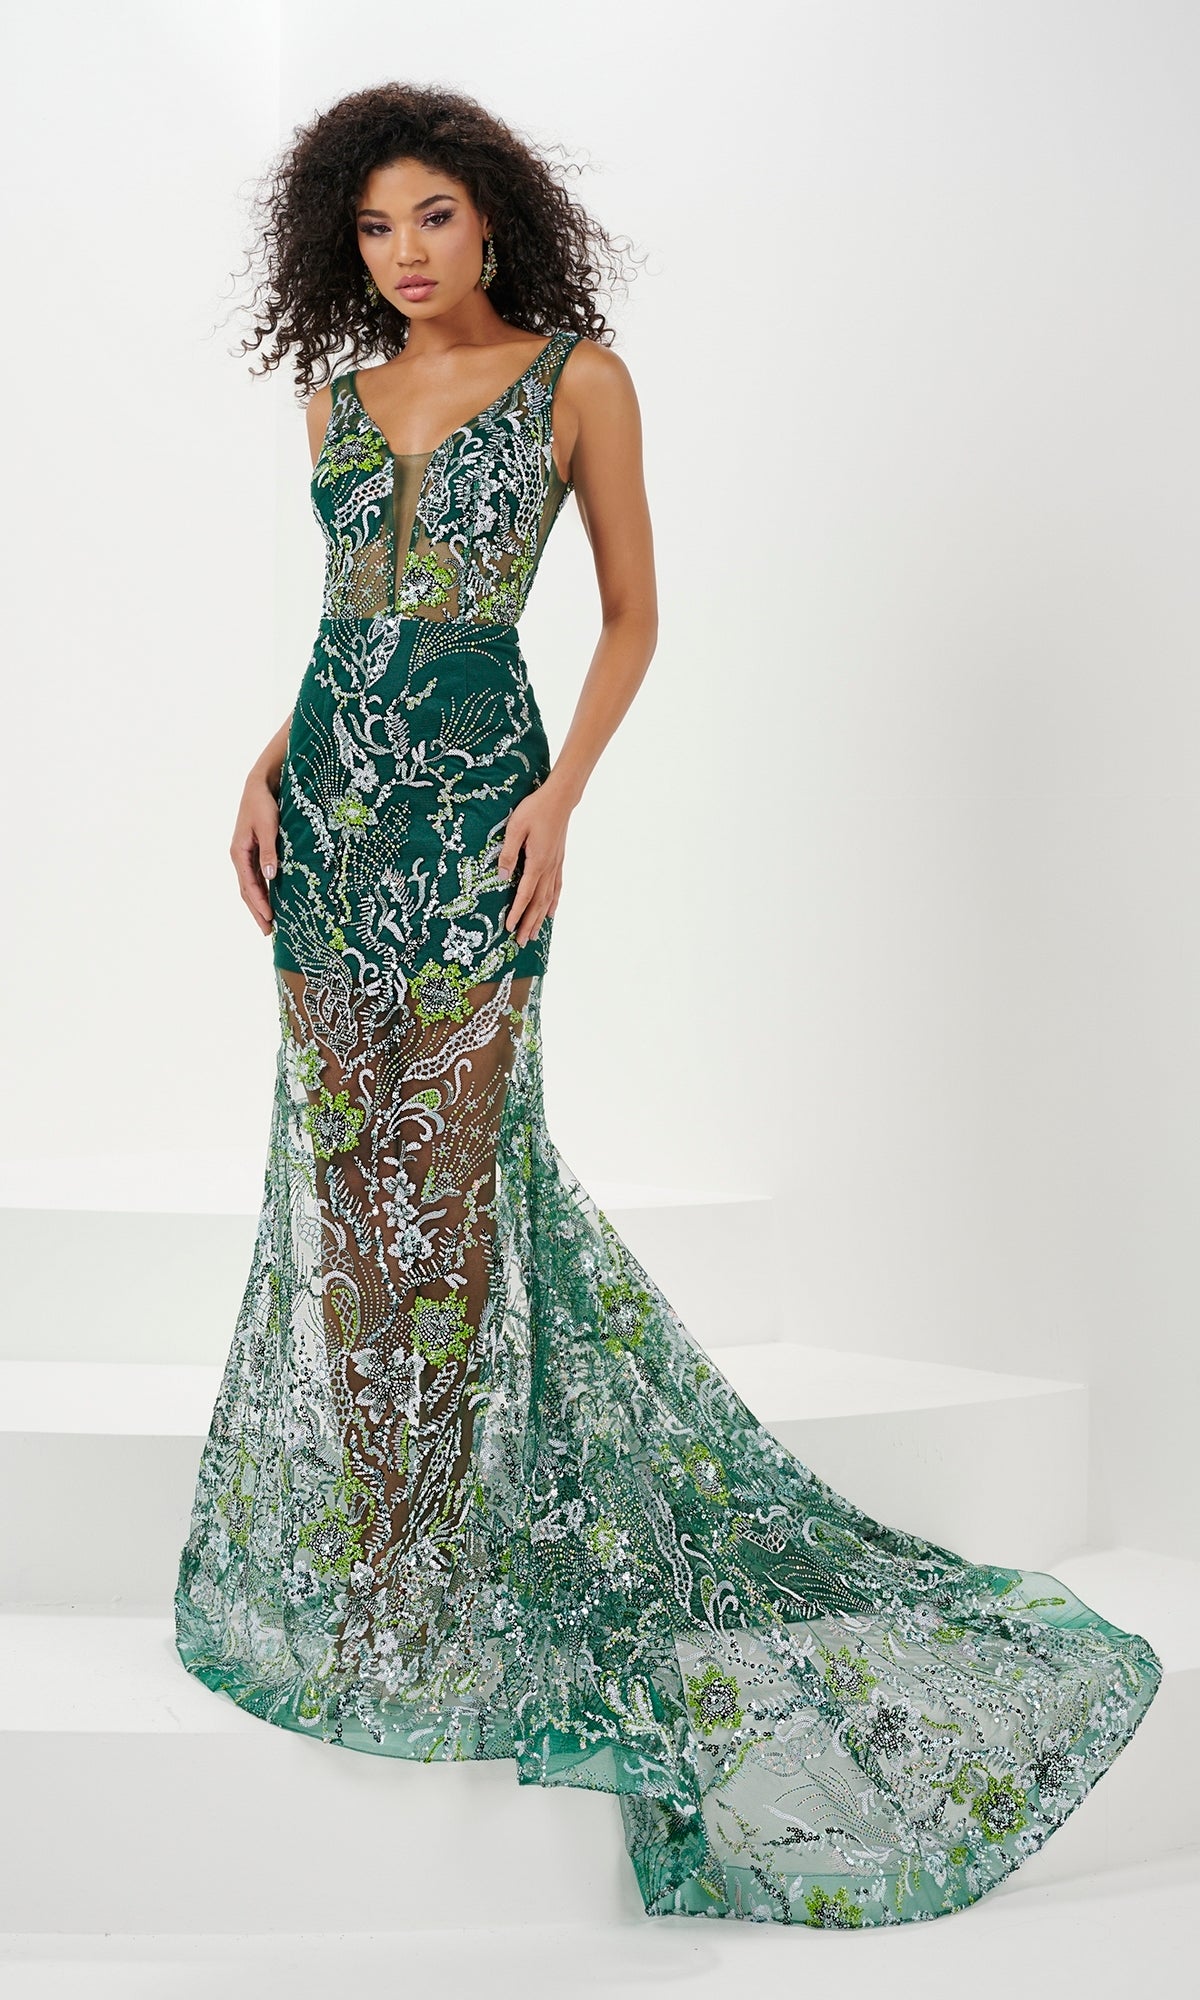 Long Prom Dress 14172 by Panoply